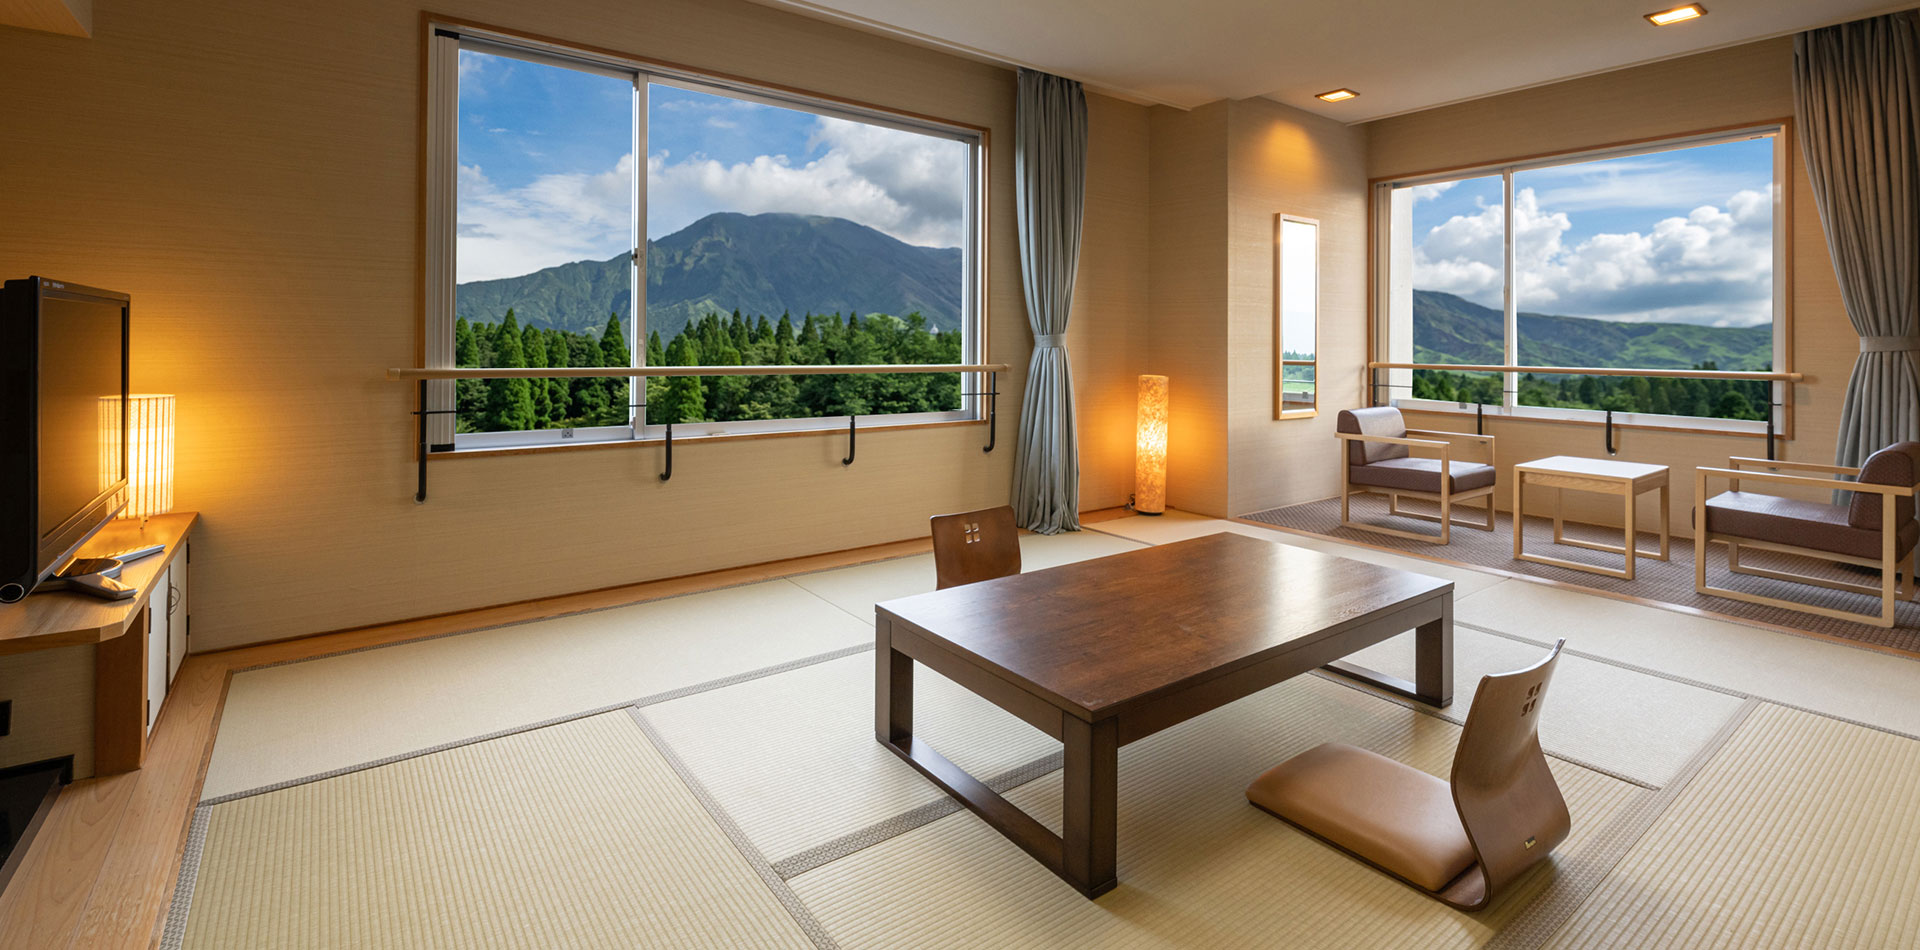 You can get a spectacular panoramic view of Aso Five Mountains from Guest rooms.